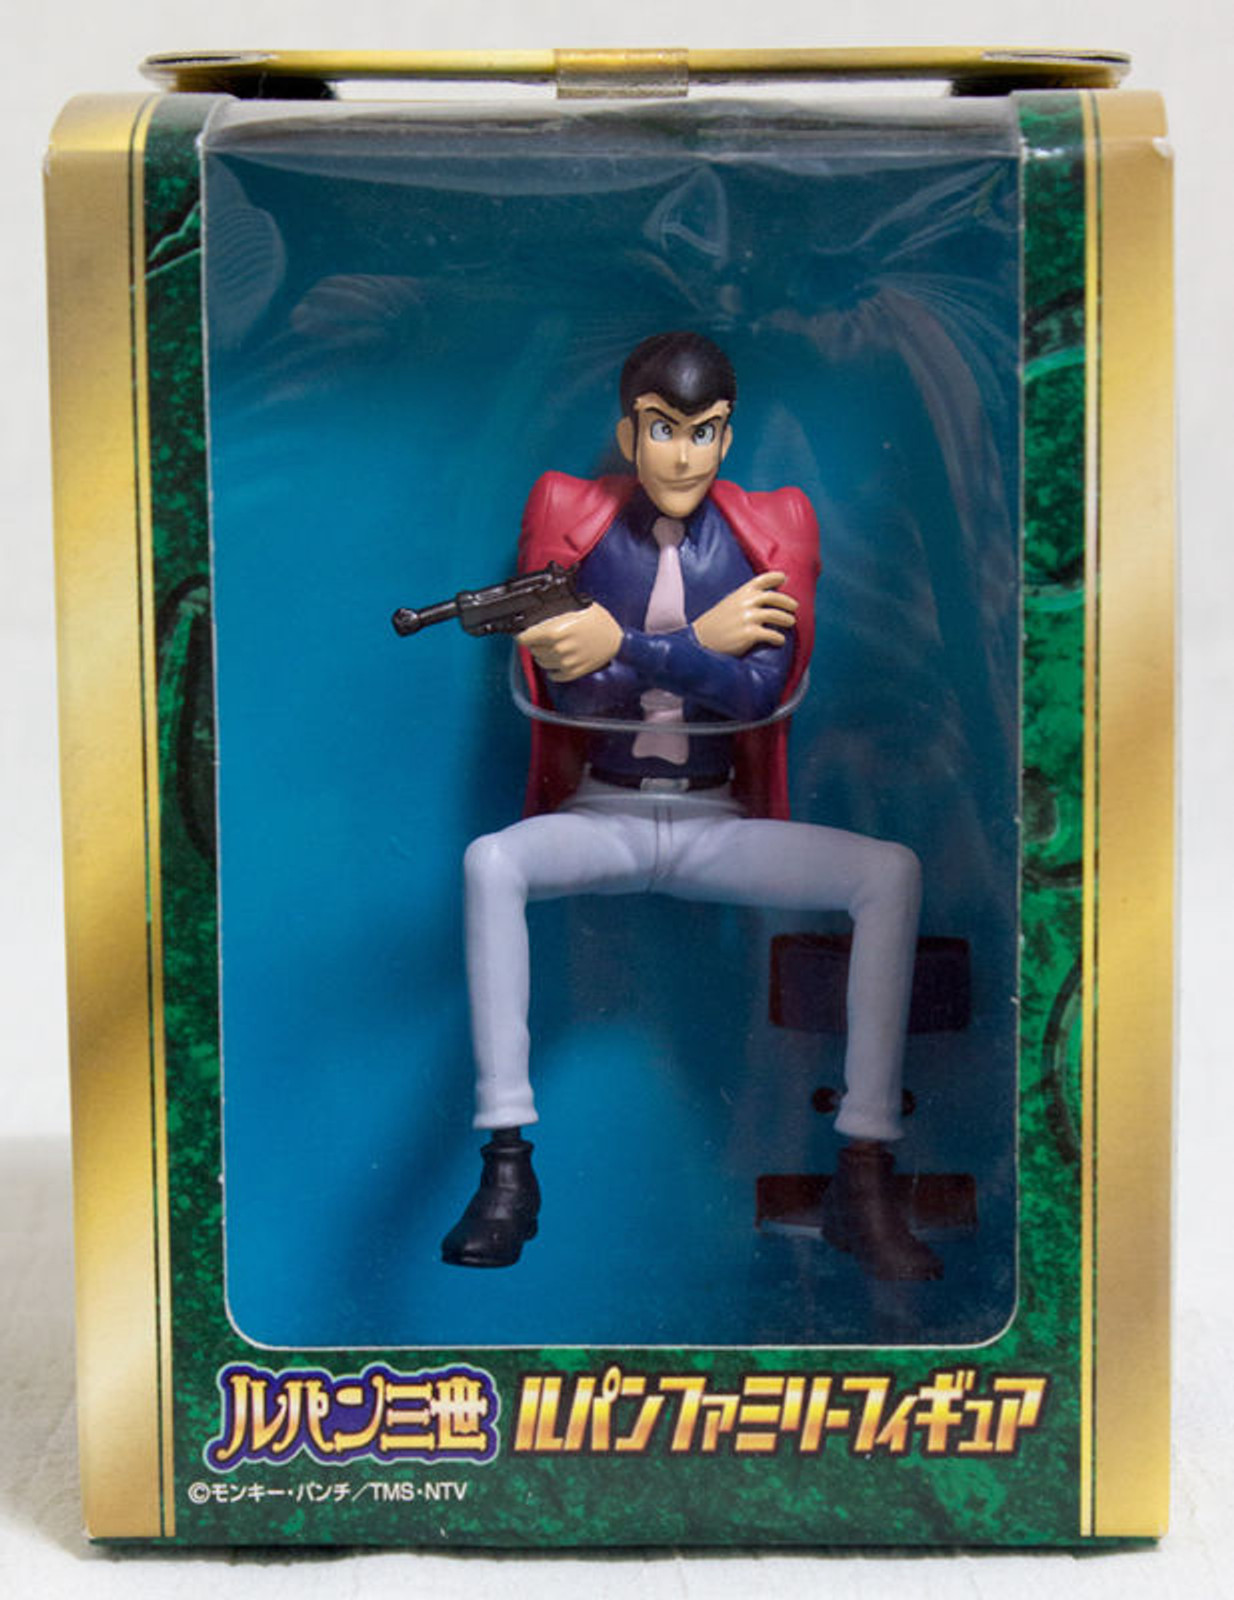 Lupin the Third (3rd) Lupin Family Figure On The Chair Banpresto JAPAN ANIME